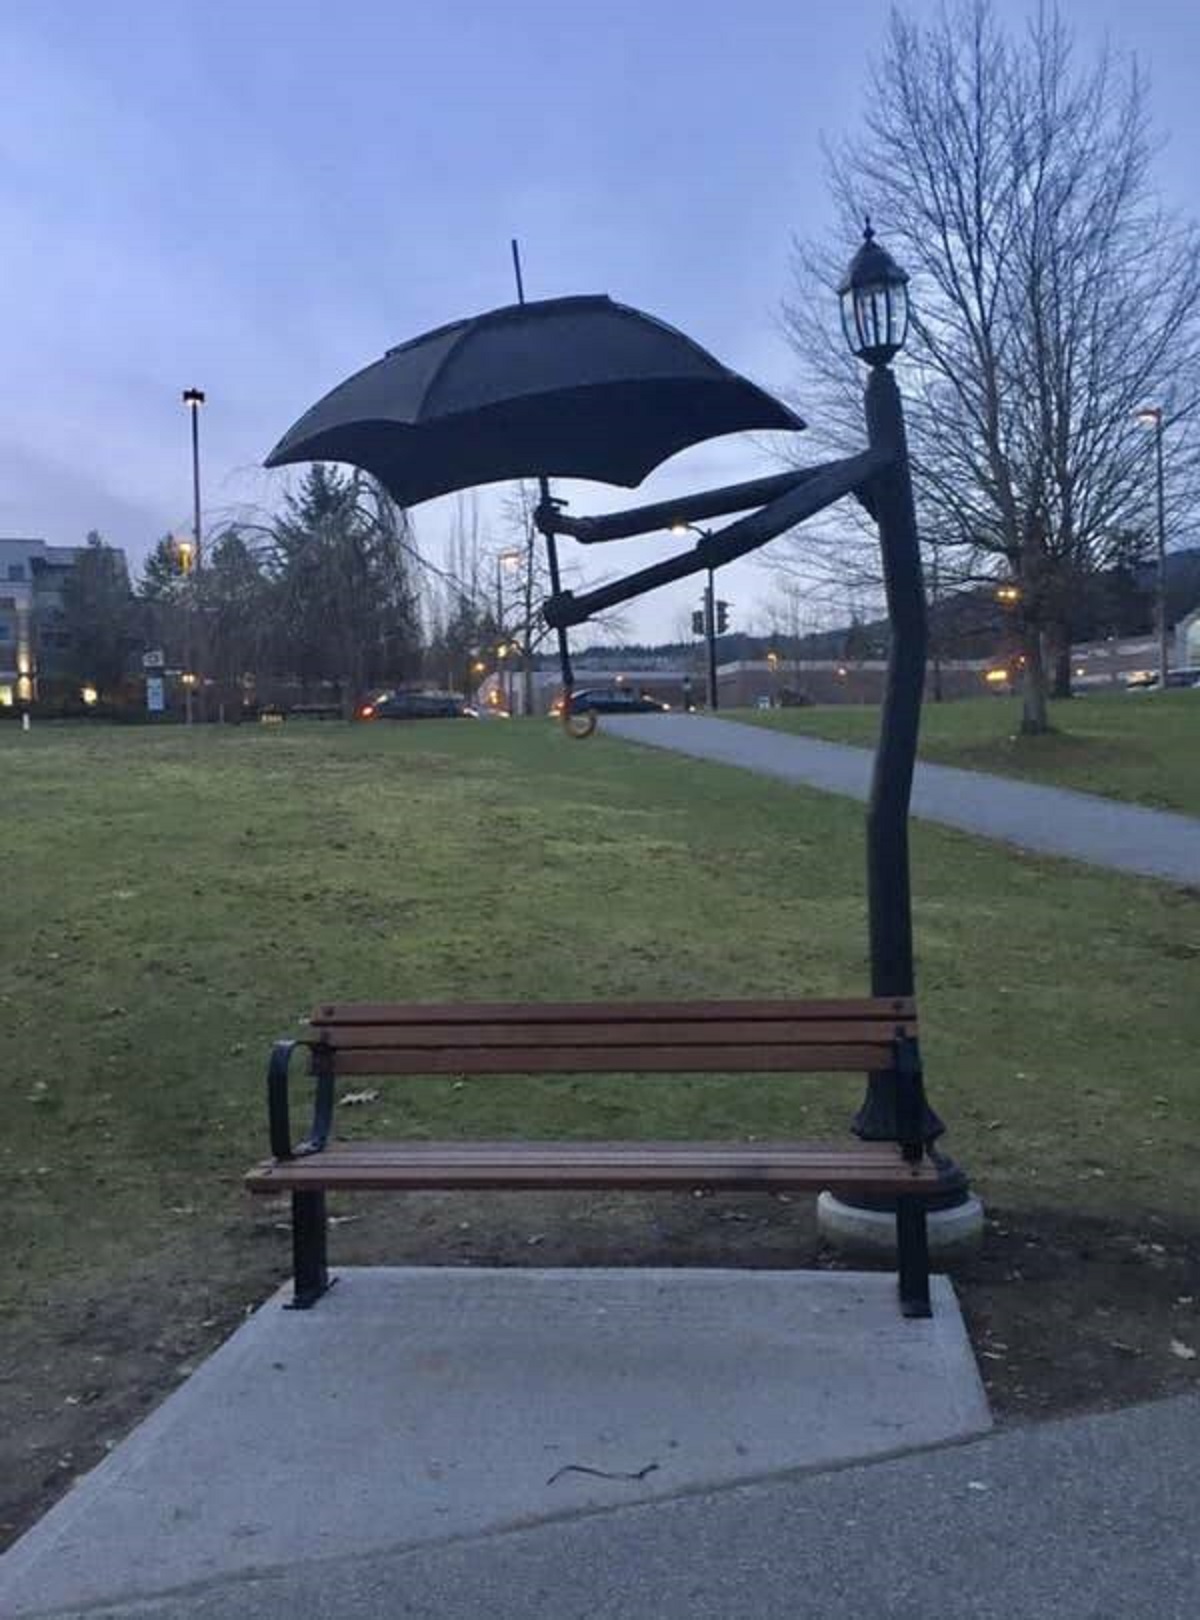 In British Columbia, benches have cute stands with umbrellas in case it's raining.